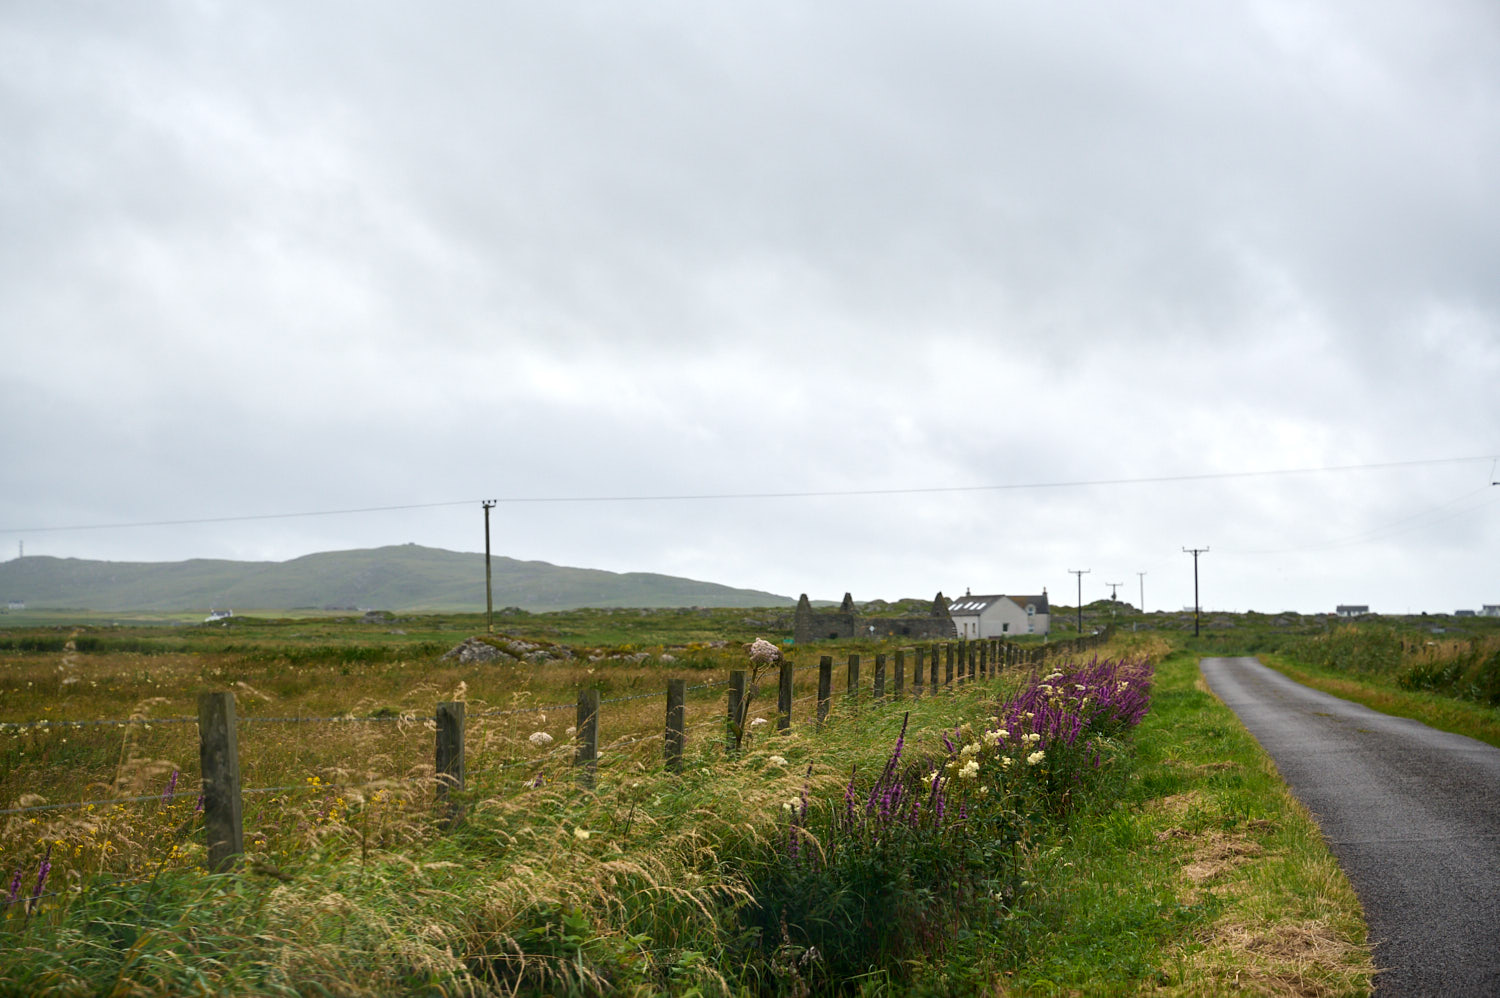 Around Tiree, all the meadows and beaches